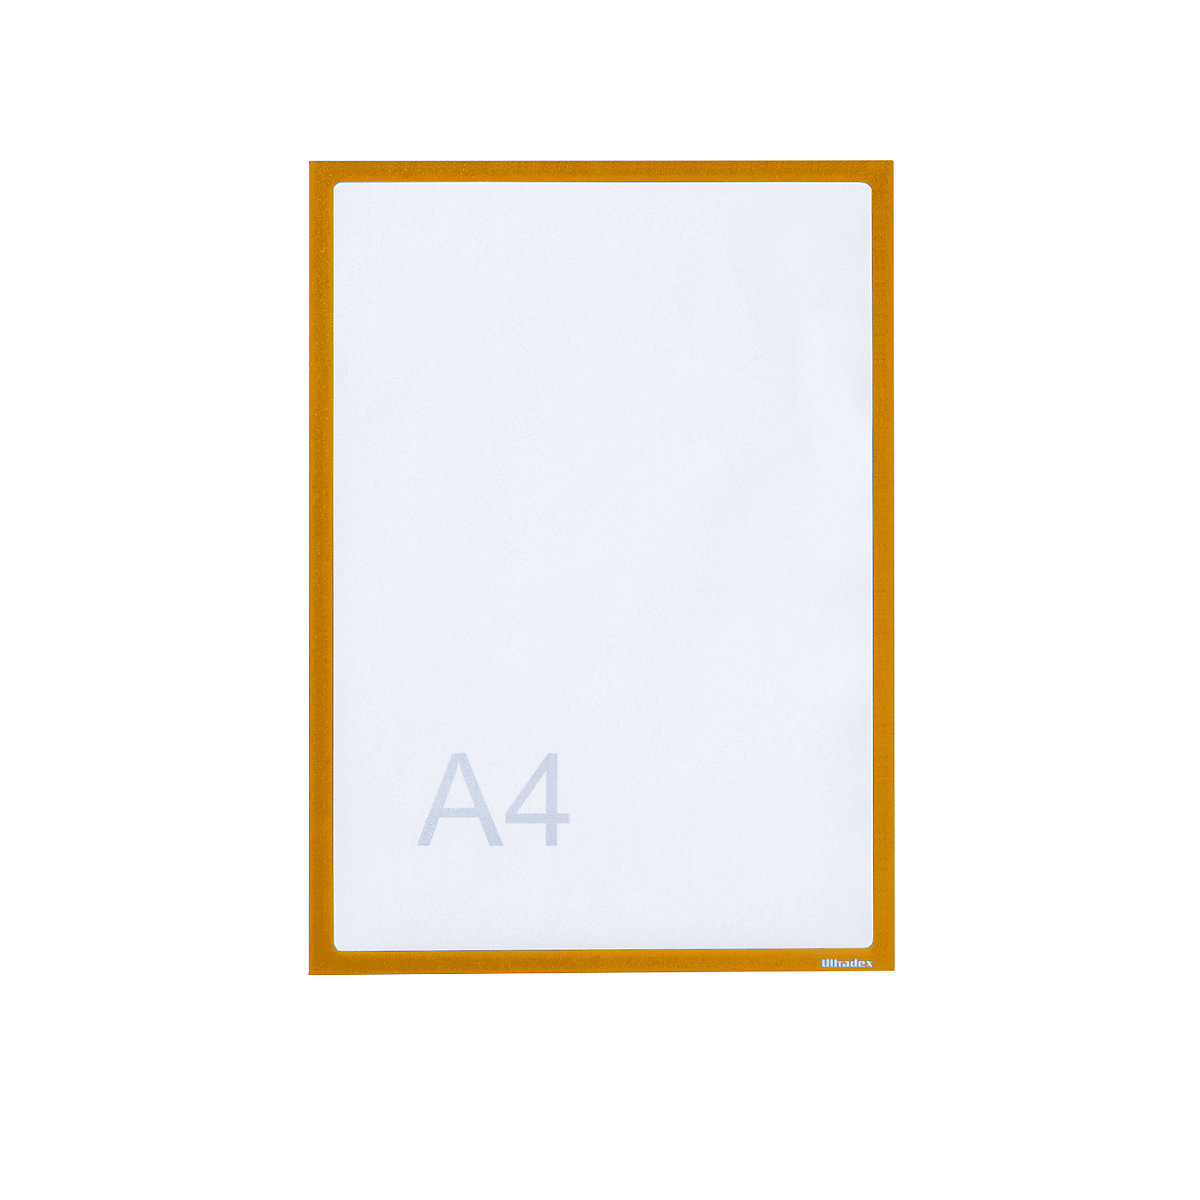 Display pockets for adhesive attachment, A4, WxH 225 x 312 mm, orange frame, pack of 25-3